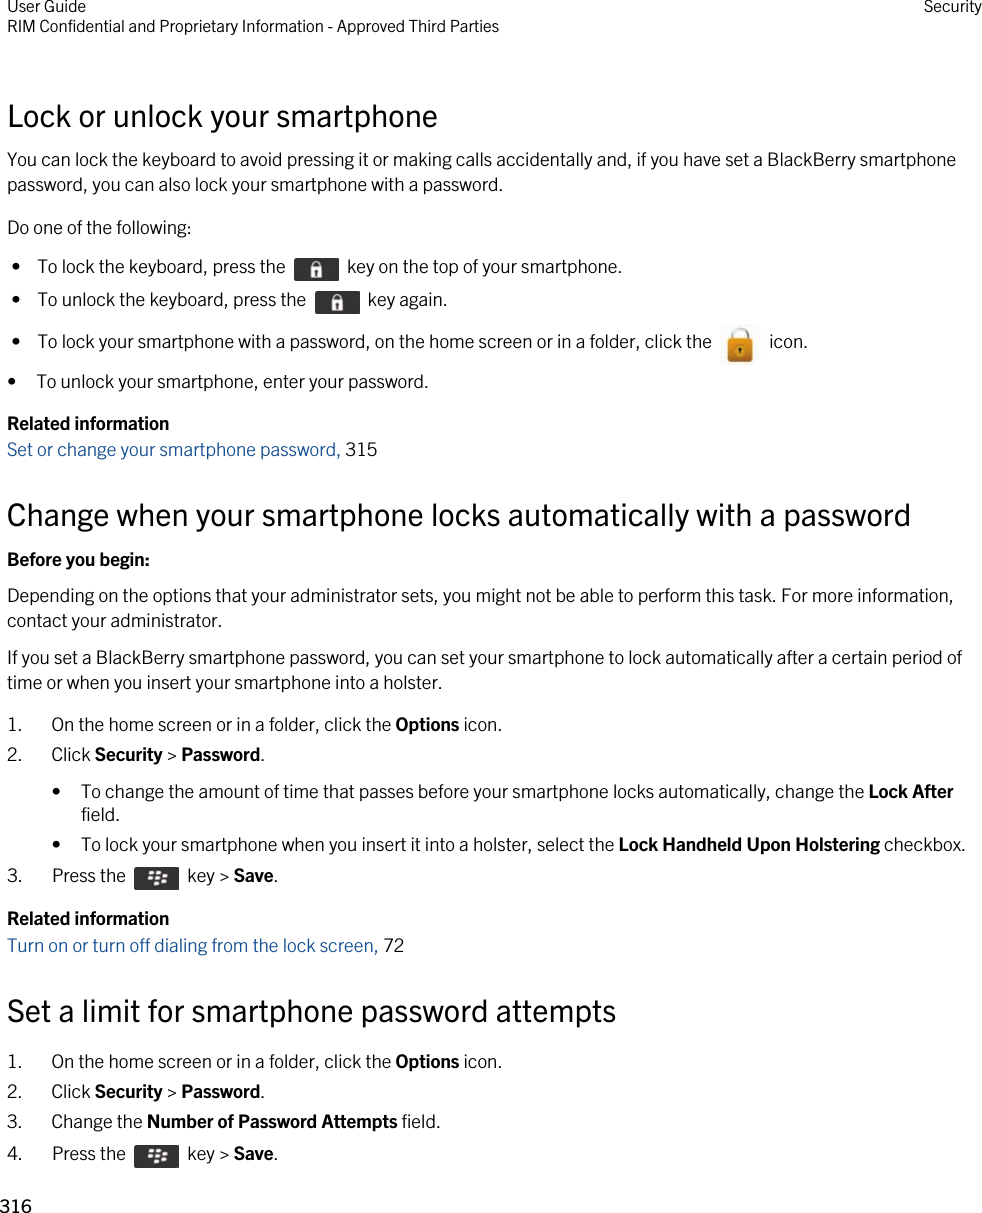 Lock or unlock your smartphoneYou can lock the keyboard to avoid pressing it or making calls accidentally and, if you have set a BlackBerry smartphone password, you can also lock your smartphone with a password.Do one of the following: •  To lock the keyboard, press the    key on the top of your smartphone. •  To unlock the keyboard, press the    key again. •  To lock your smartphone with a password, on the home screen or in a folder, click the    icon.• To unlock your smartphone, enter your password.Related informationSet or change your smartphone password, 315 Change when your smartphone locks automatically with a passwordBefore you begin: Depending on the options that your administrator sets, you might not be able to perform this task. For more information, contact your administrator.If you set a BlackBerry smartphone password, you can set your smartphone to lock automatically after a certain period of time or when you insert your smartphone into a holster.1. On the home screen or in a folder, click the Options icon.2. Click Security &gt; Password.• To change the amount of time that passes before your smartphone locks automatically, change the Lock After field.• To lock your smartphone when you insert it into a holster, select the Lock Handheld Upon Holstering checkbox.3.  Press the    key &gt; Save. Related informationTurn on or turn off dialing from the lock screen, 72 Set a limit for smartphone password attempts1. On the home screen or in a folder, click the Options icon.2. Click Security &gt; Password.3. Change the Number of Password Attempts field.4.  Press the    key &gt; Save. User GuideRIM Confidential and Proprietary Information - Approved Third Parties Security316 